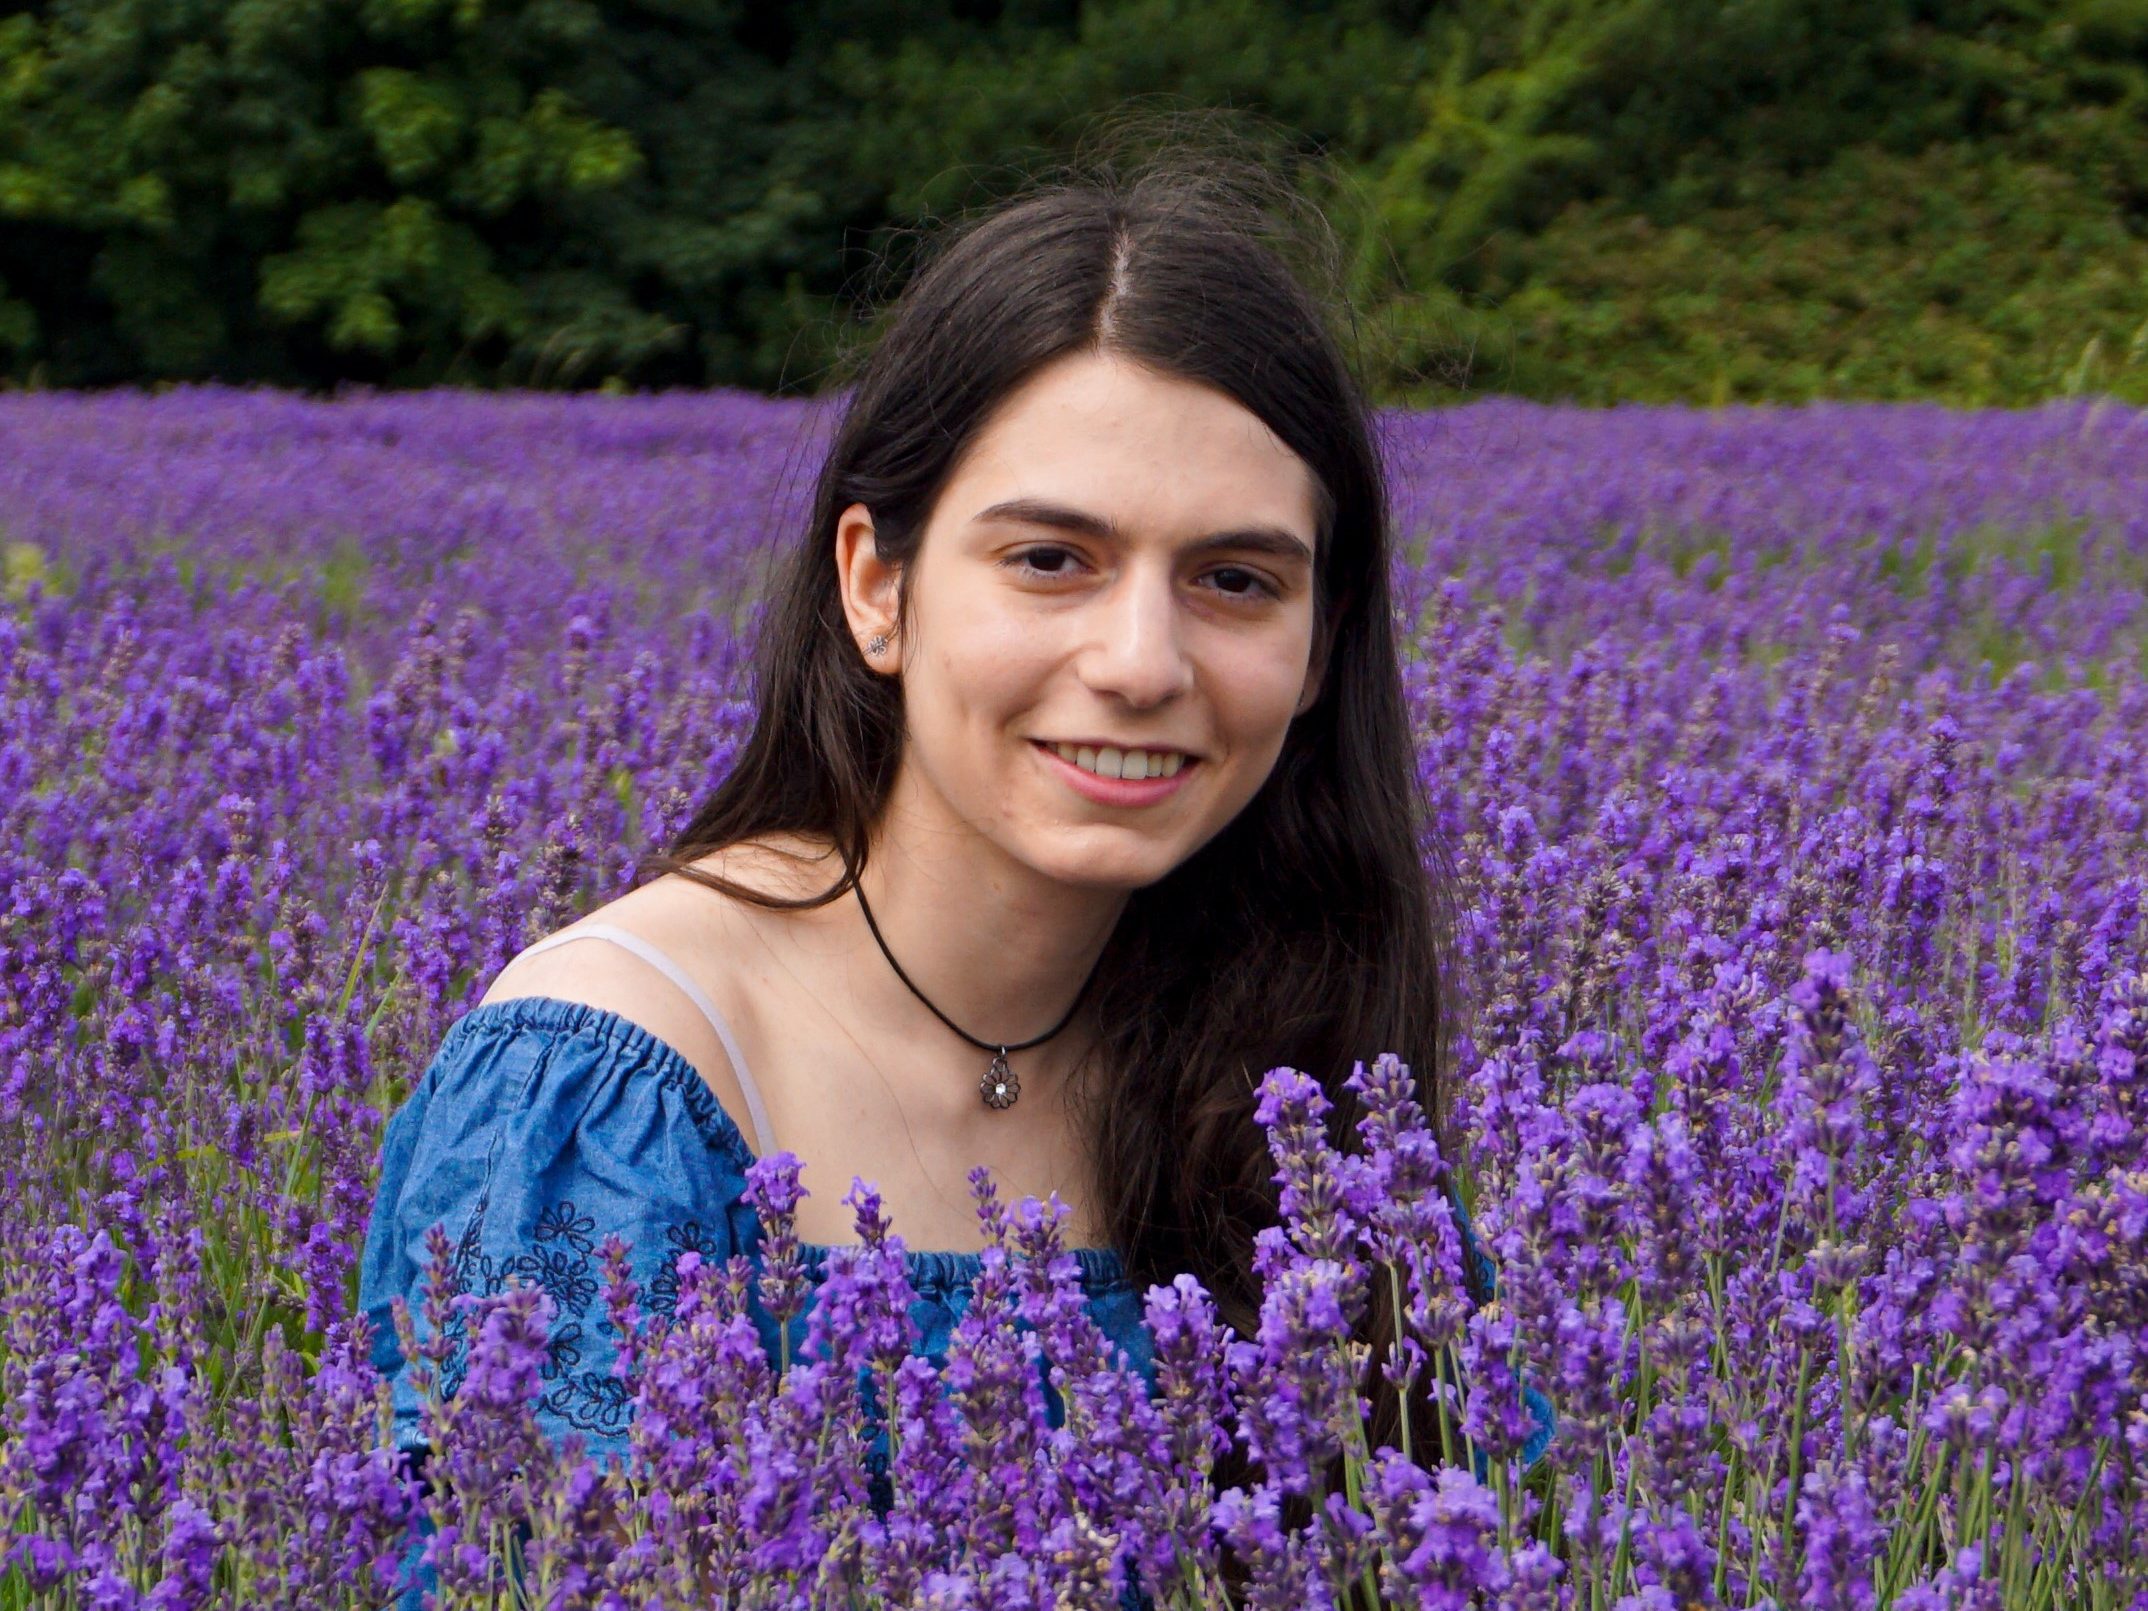 A girl in the middle of a lavender field